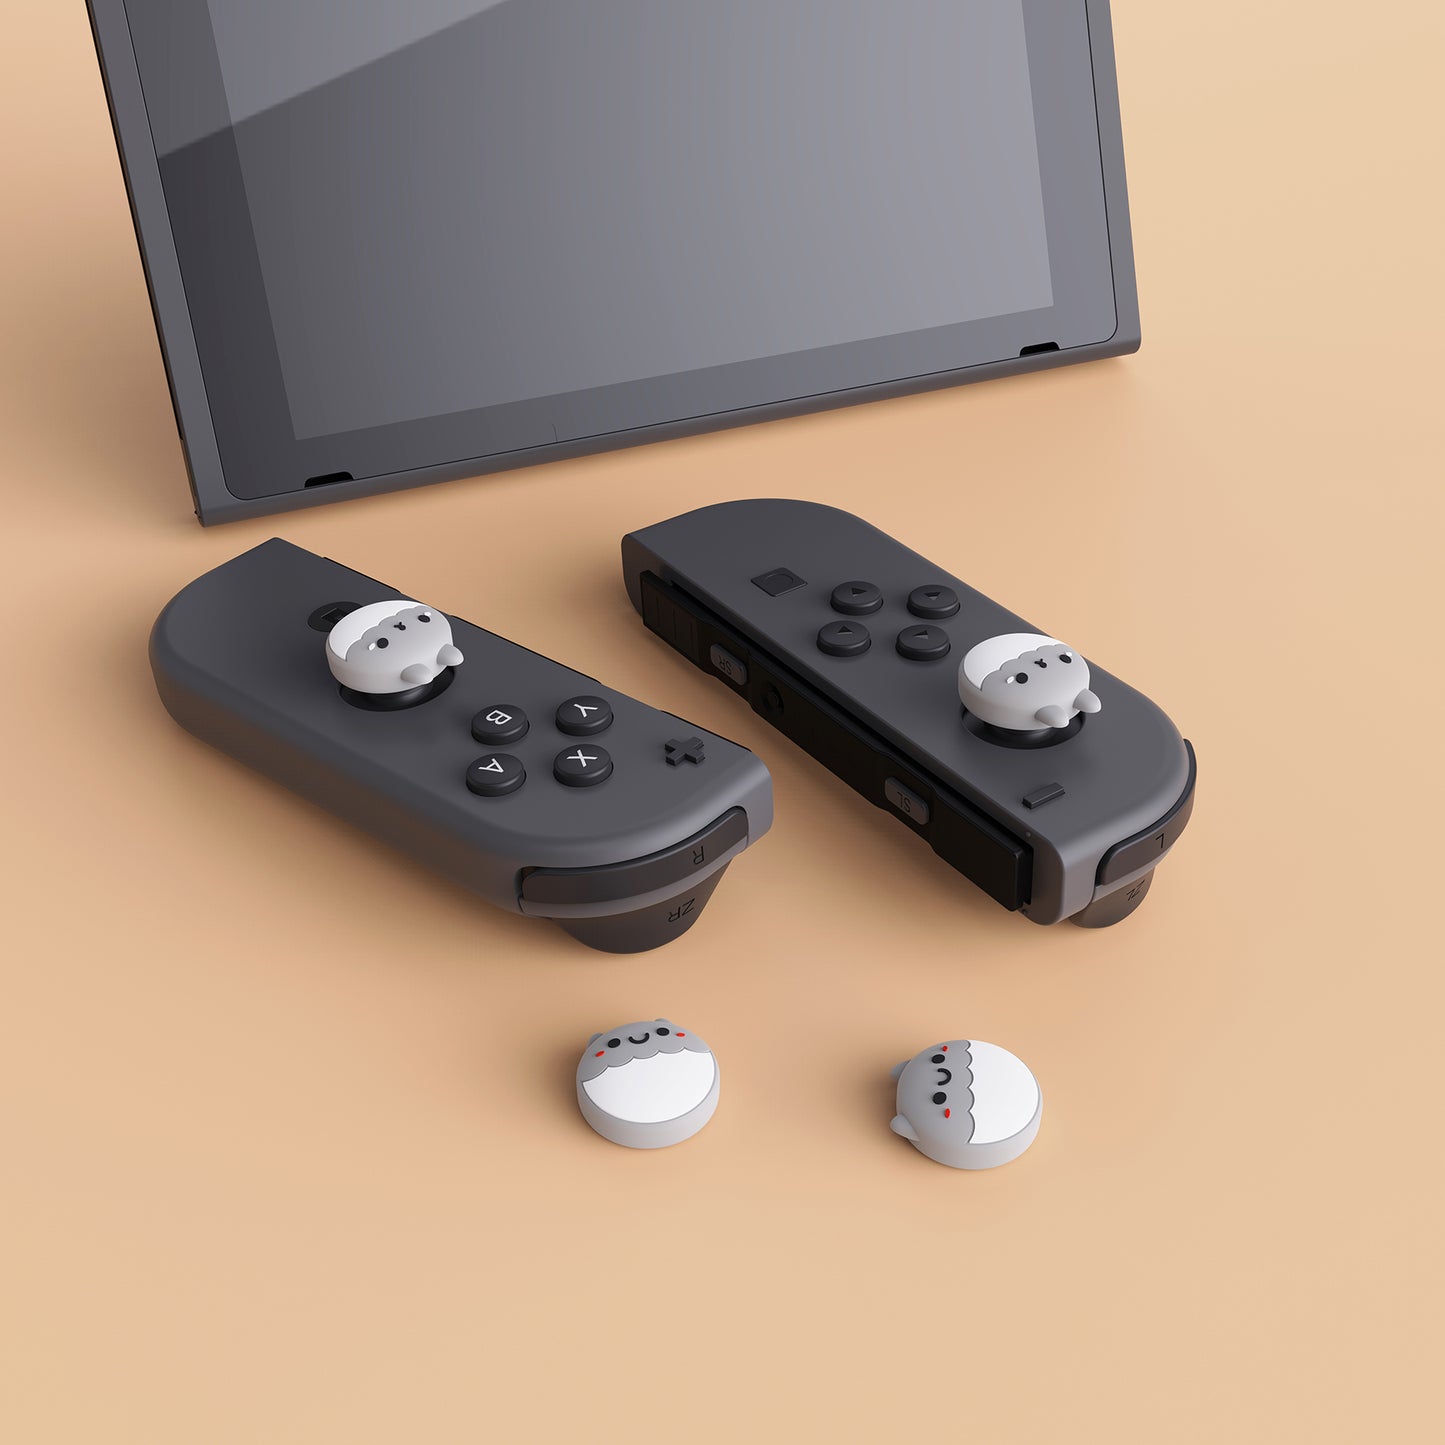 PlayVital Rabbit & Squirrel Cute Thumb Grip Caps for Nintendo Switch, Joystick Caps for Nintendo Switch Lite, Analog Cover Thumbstick Grips for OLED Joycon - Light Gray - NJM1124 playvital